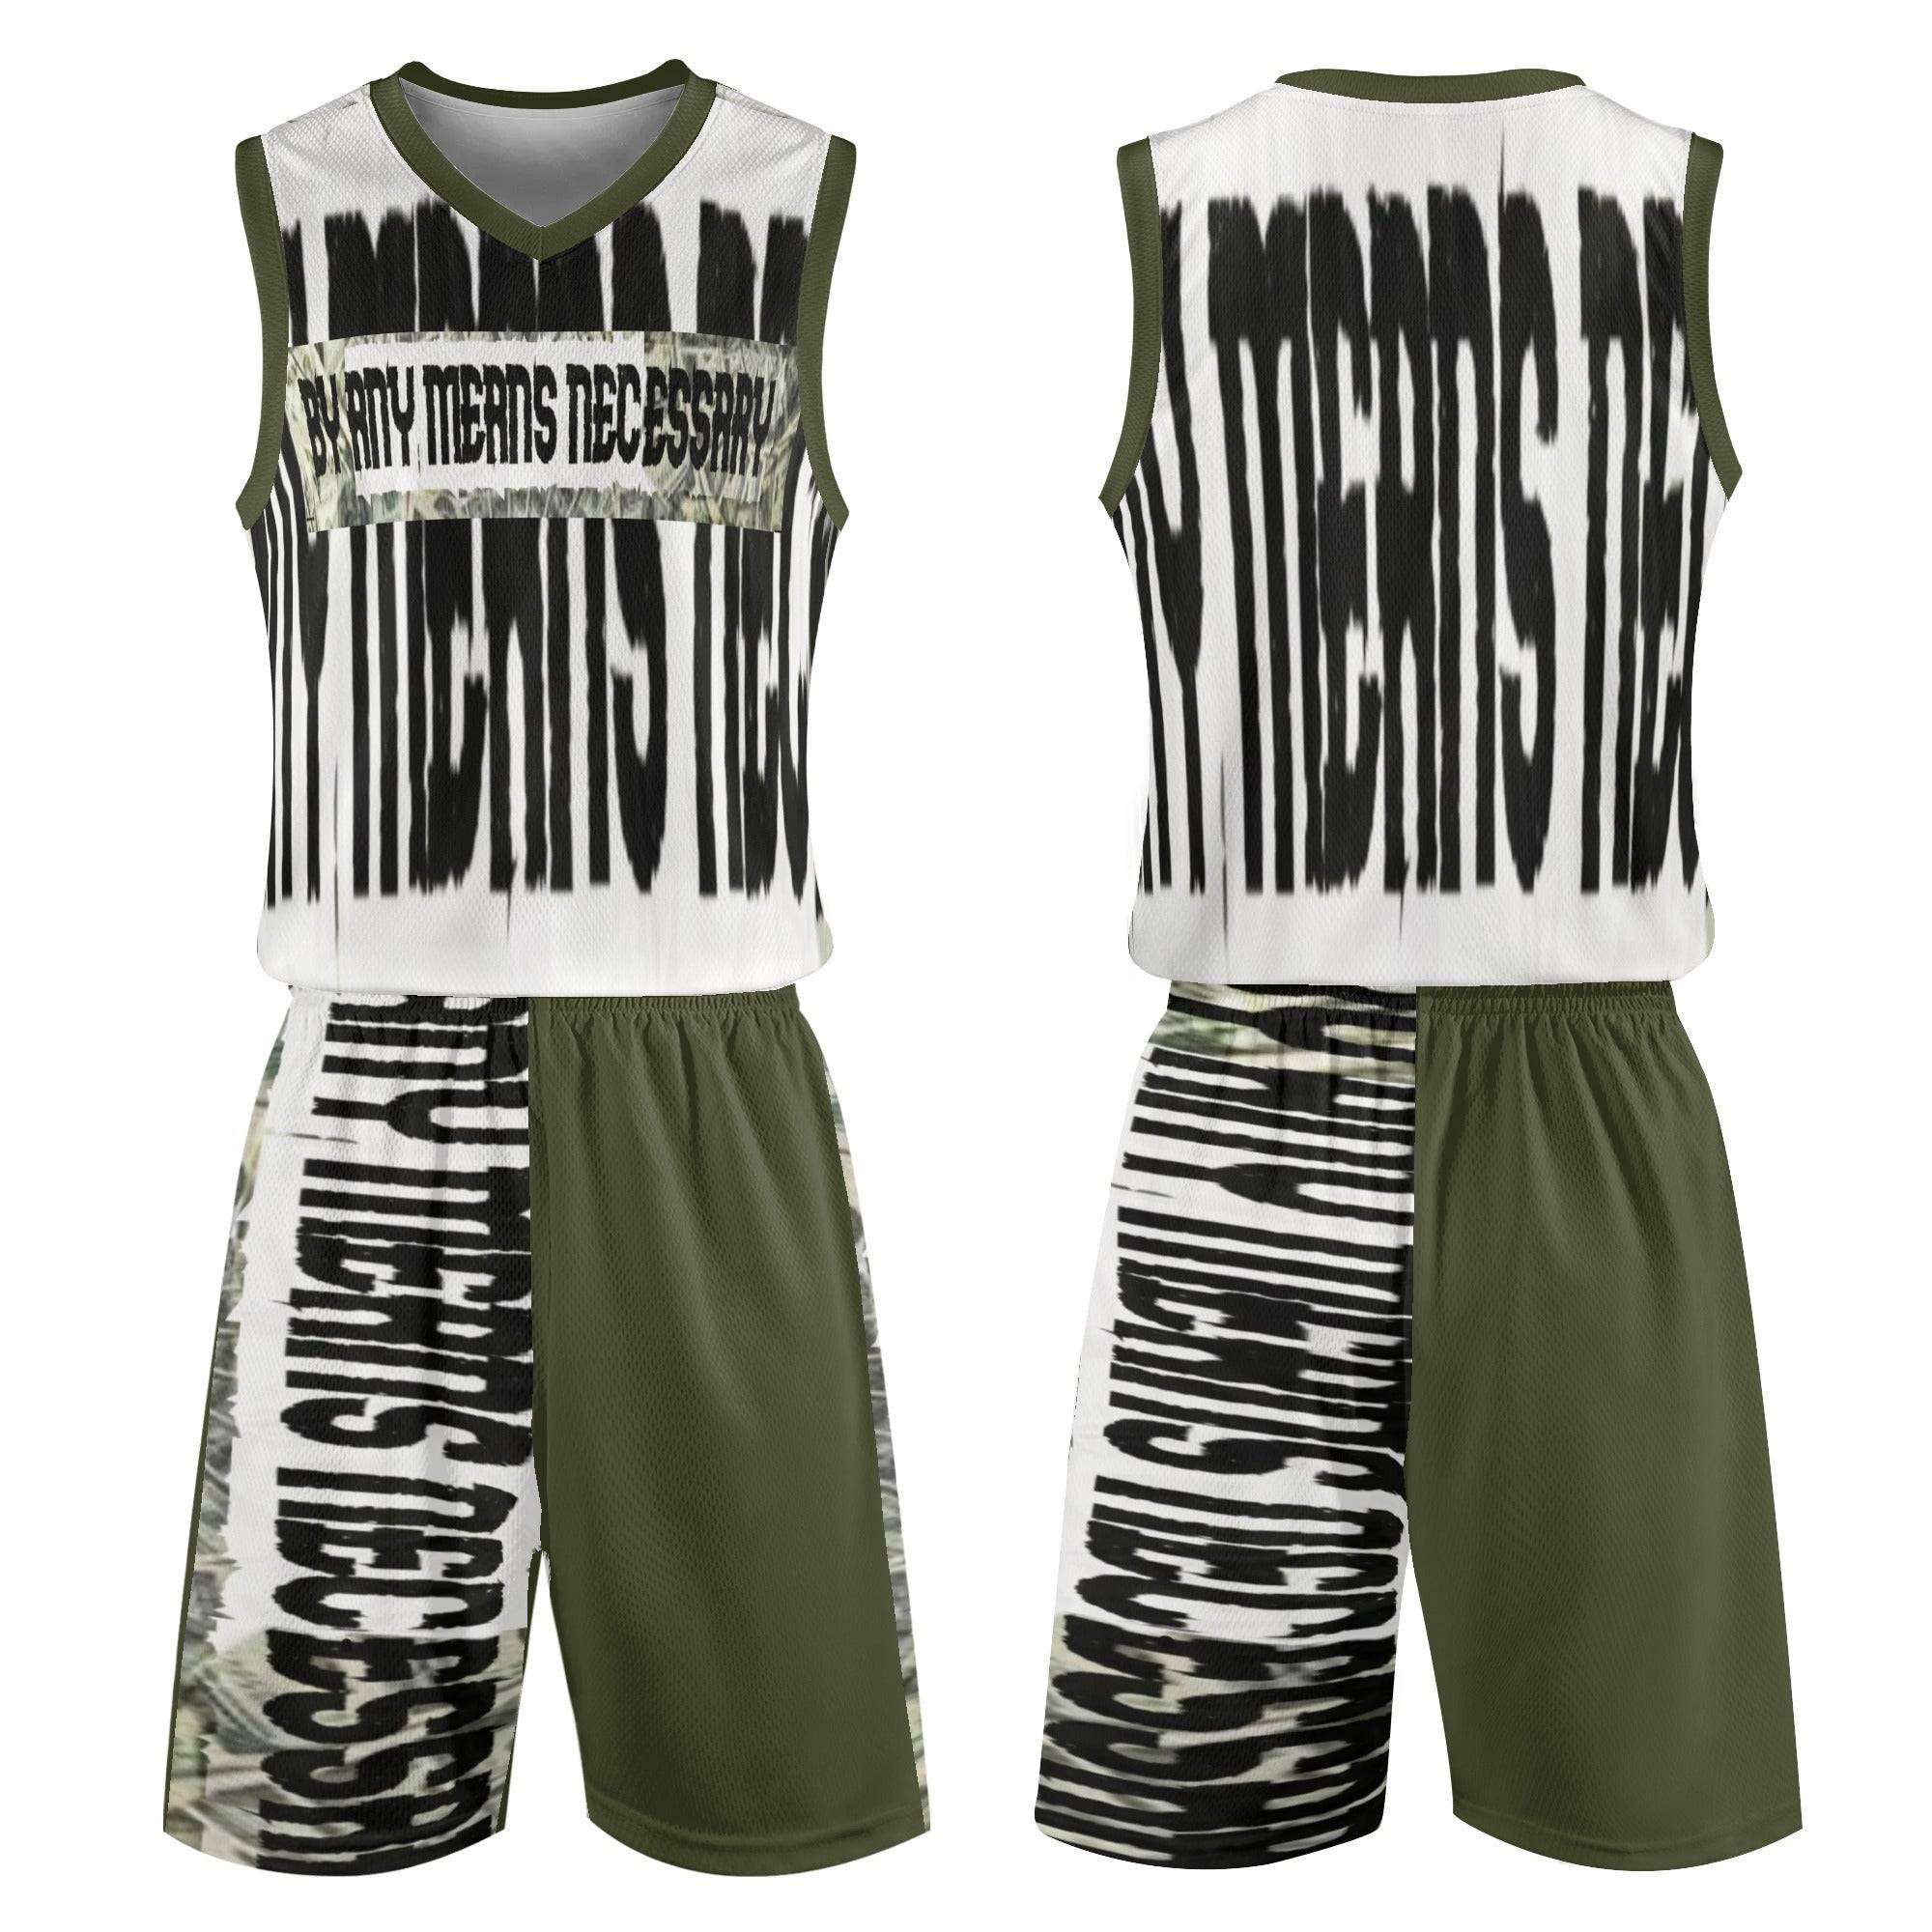 4XL - B.A.M.N - By Any Means Necessary Army Green Basketball Jersey Matching Short Sets Outfit - mens short set at TFC&H Co.